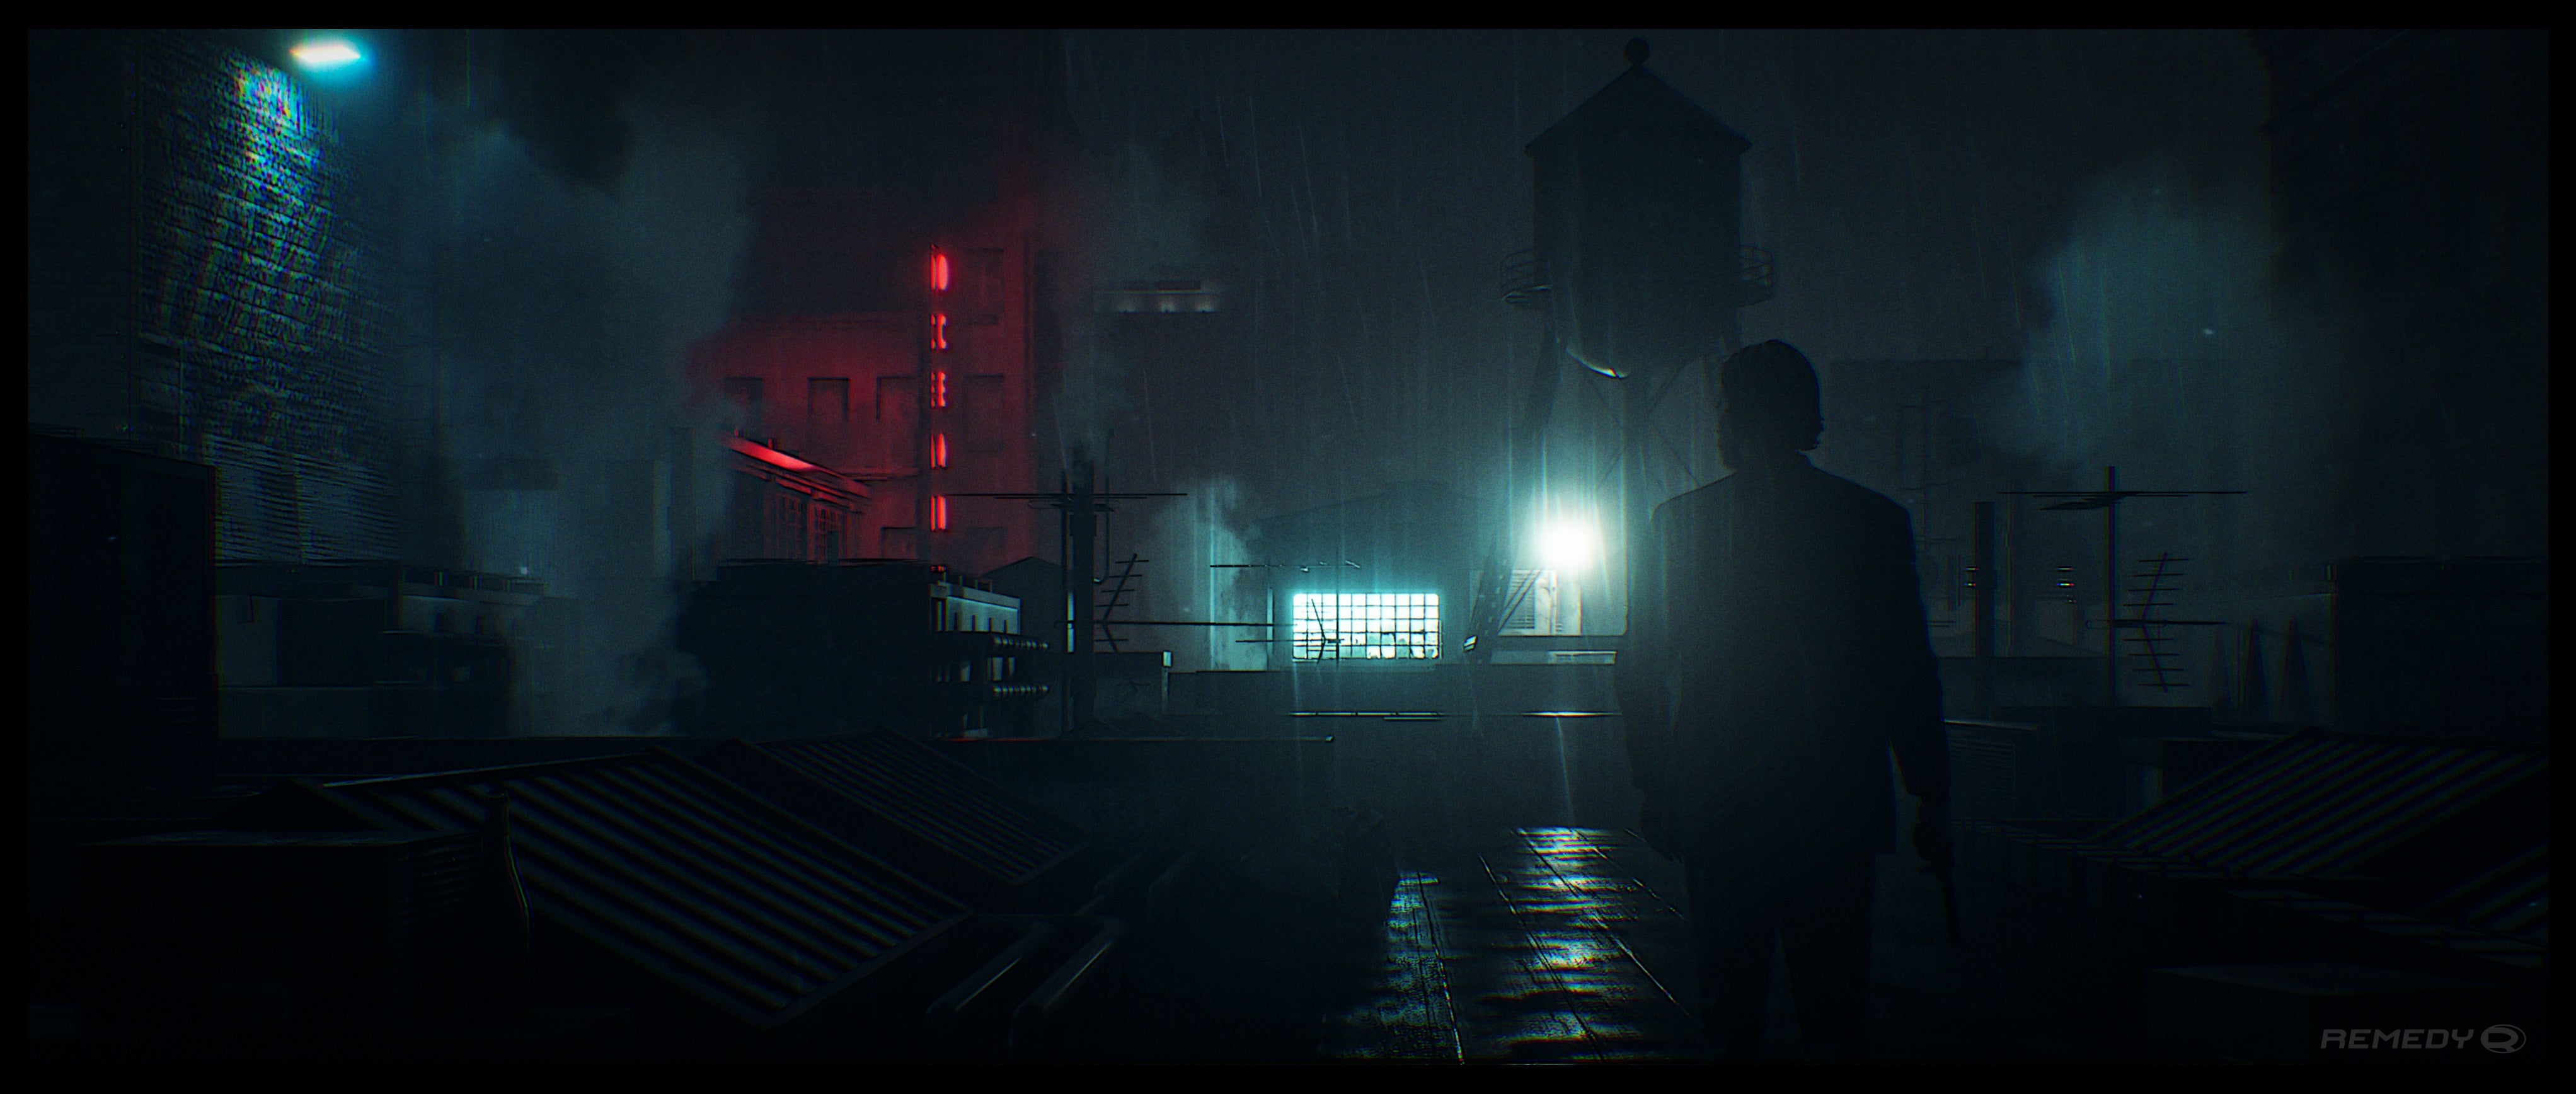 Alan Wake 2 concept art showing Alan on a rooftop in a damp city at night.